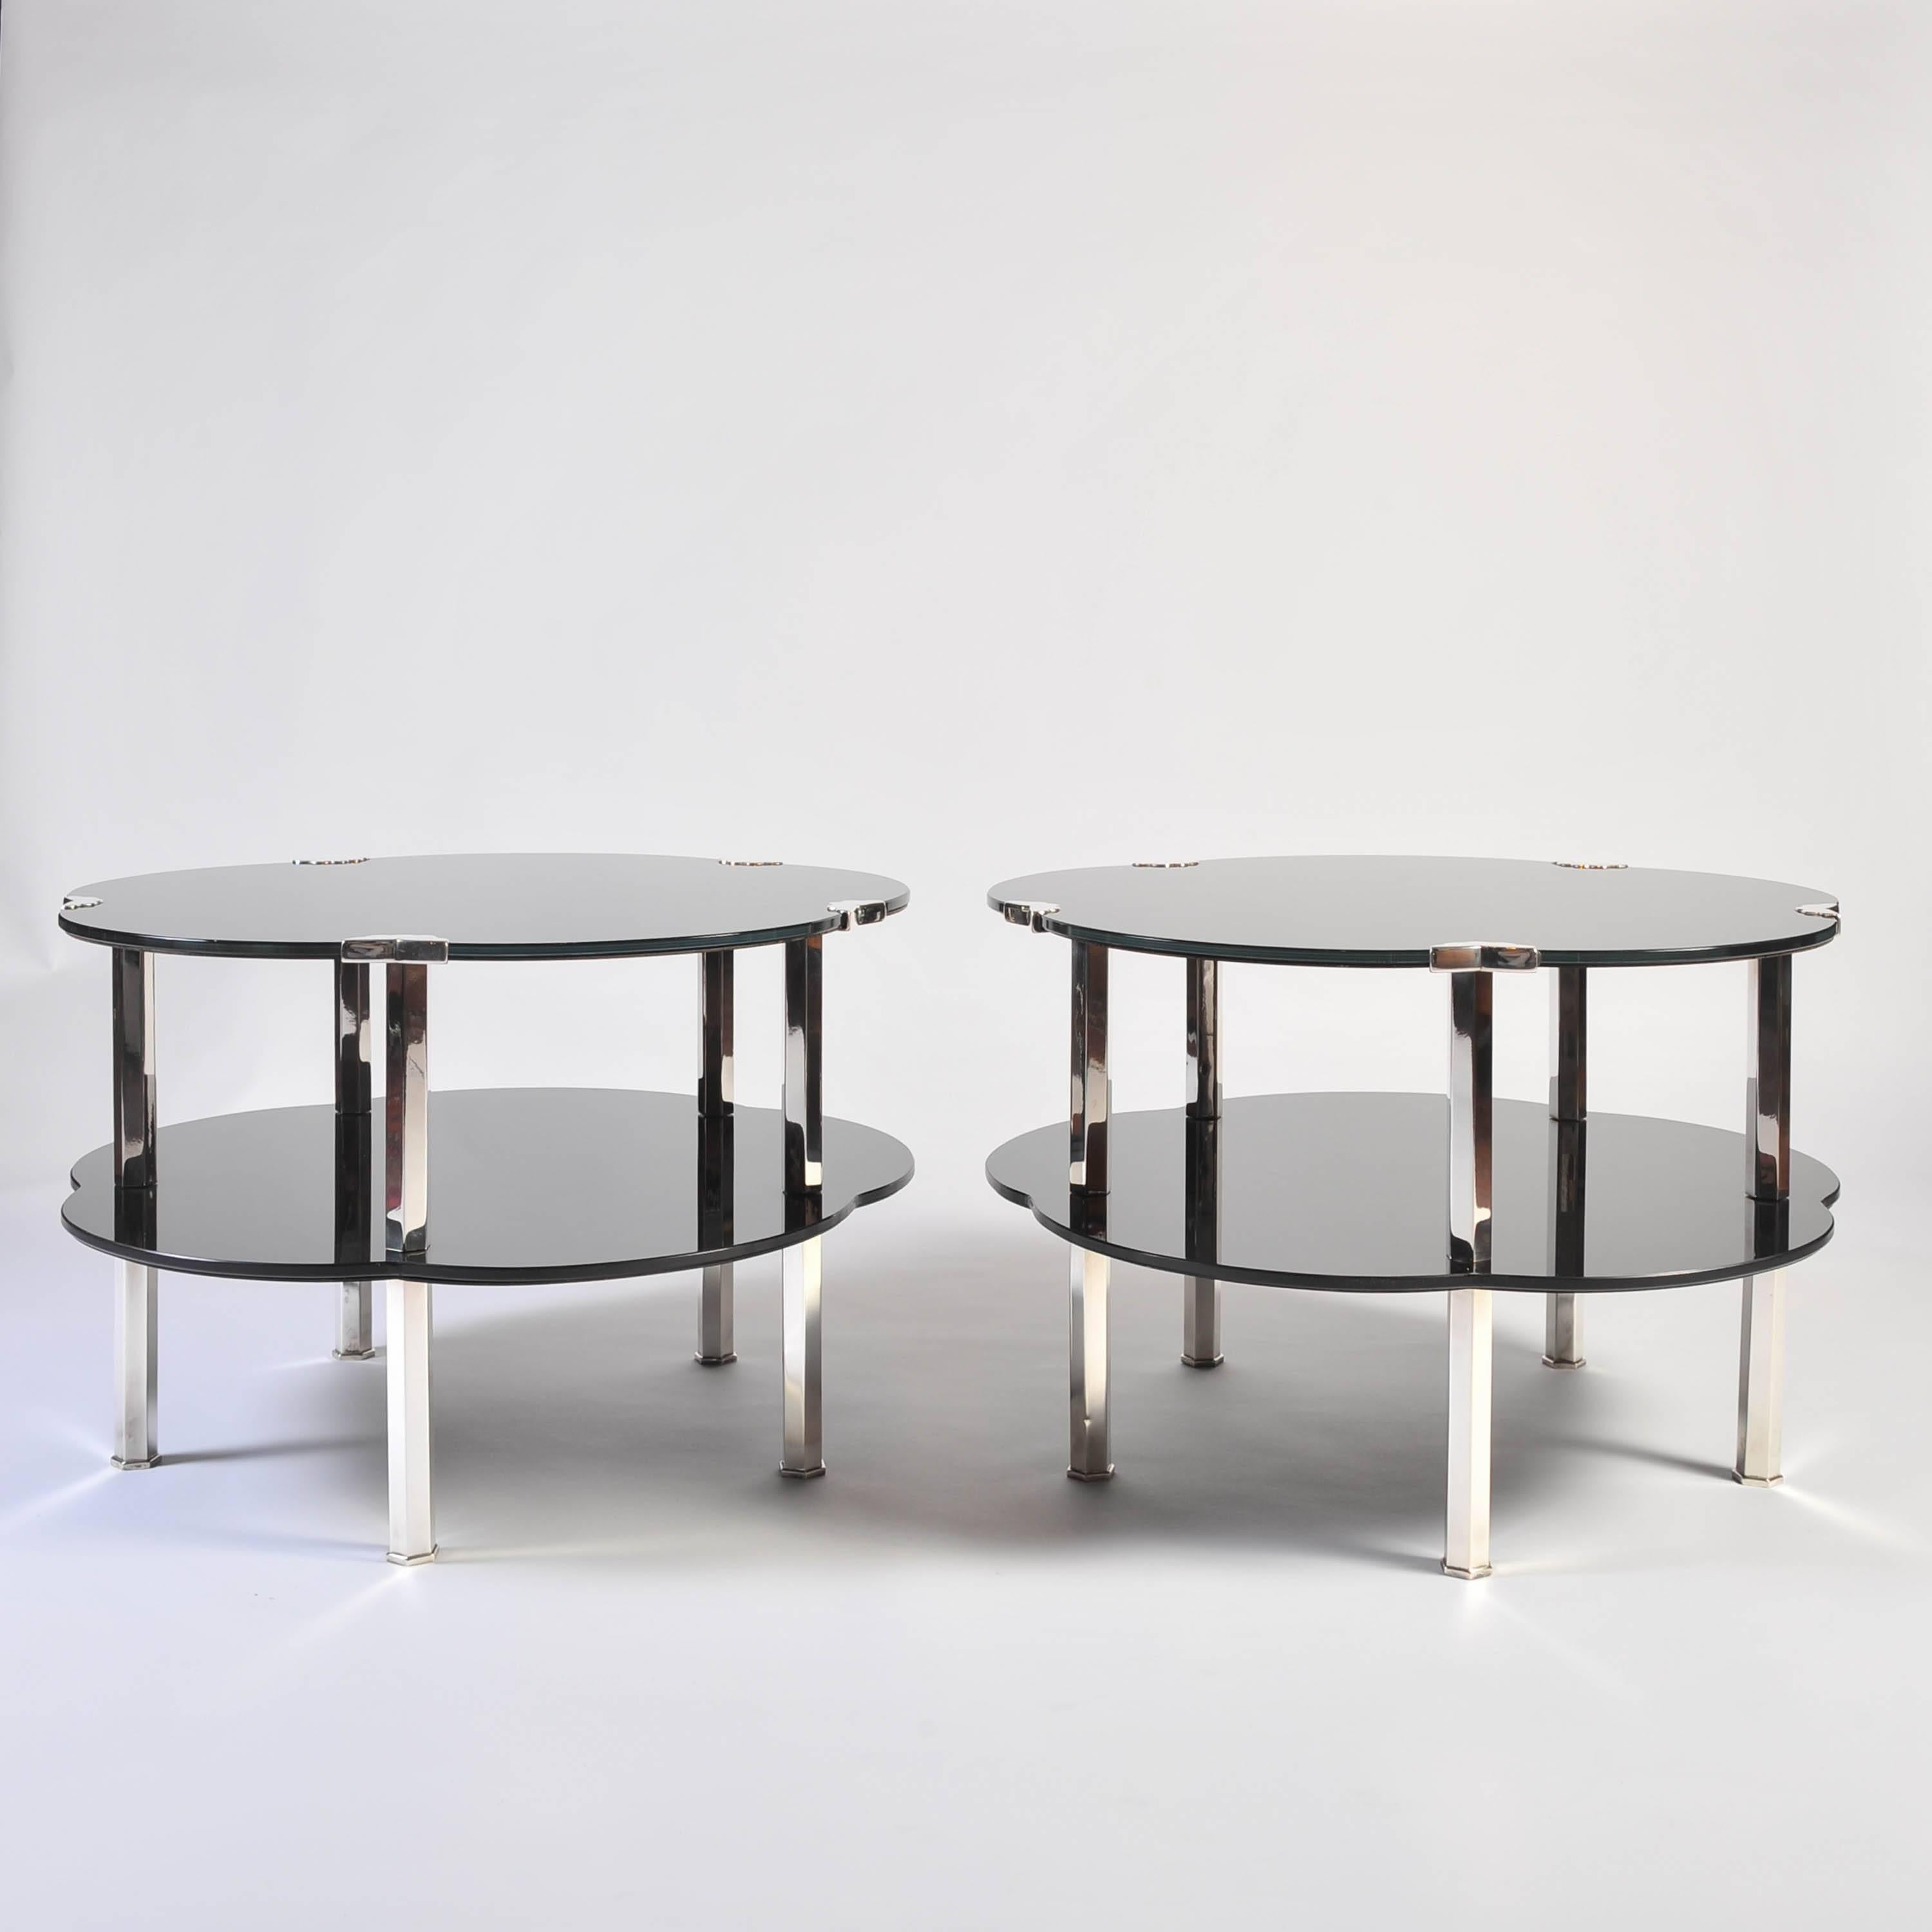 These most glamorous and striking centre, side or coffee tables have two tiers of black glass with silver plated bronze legs and mounts in the French Japonaise manner of the Art Deco period, circa 1927-1933. The five-sided scalloped 